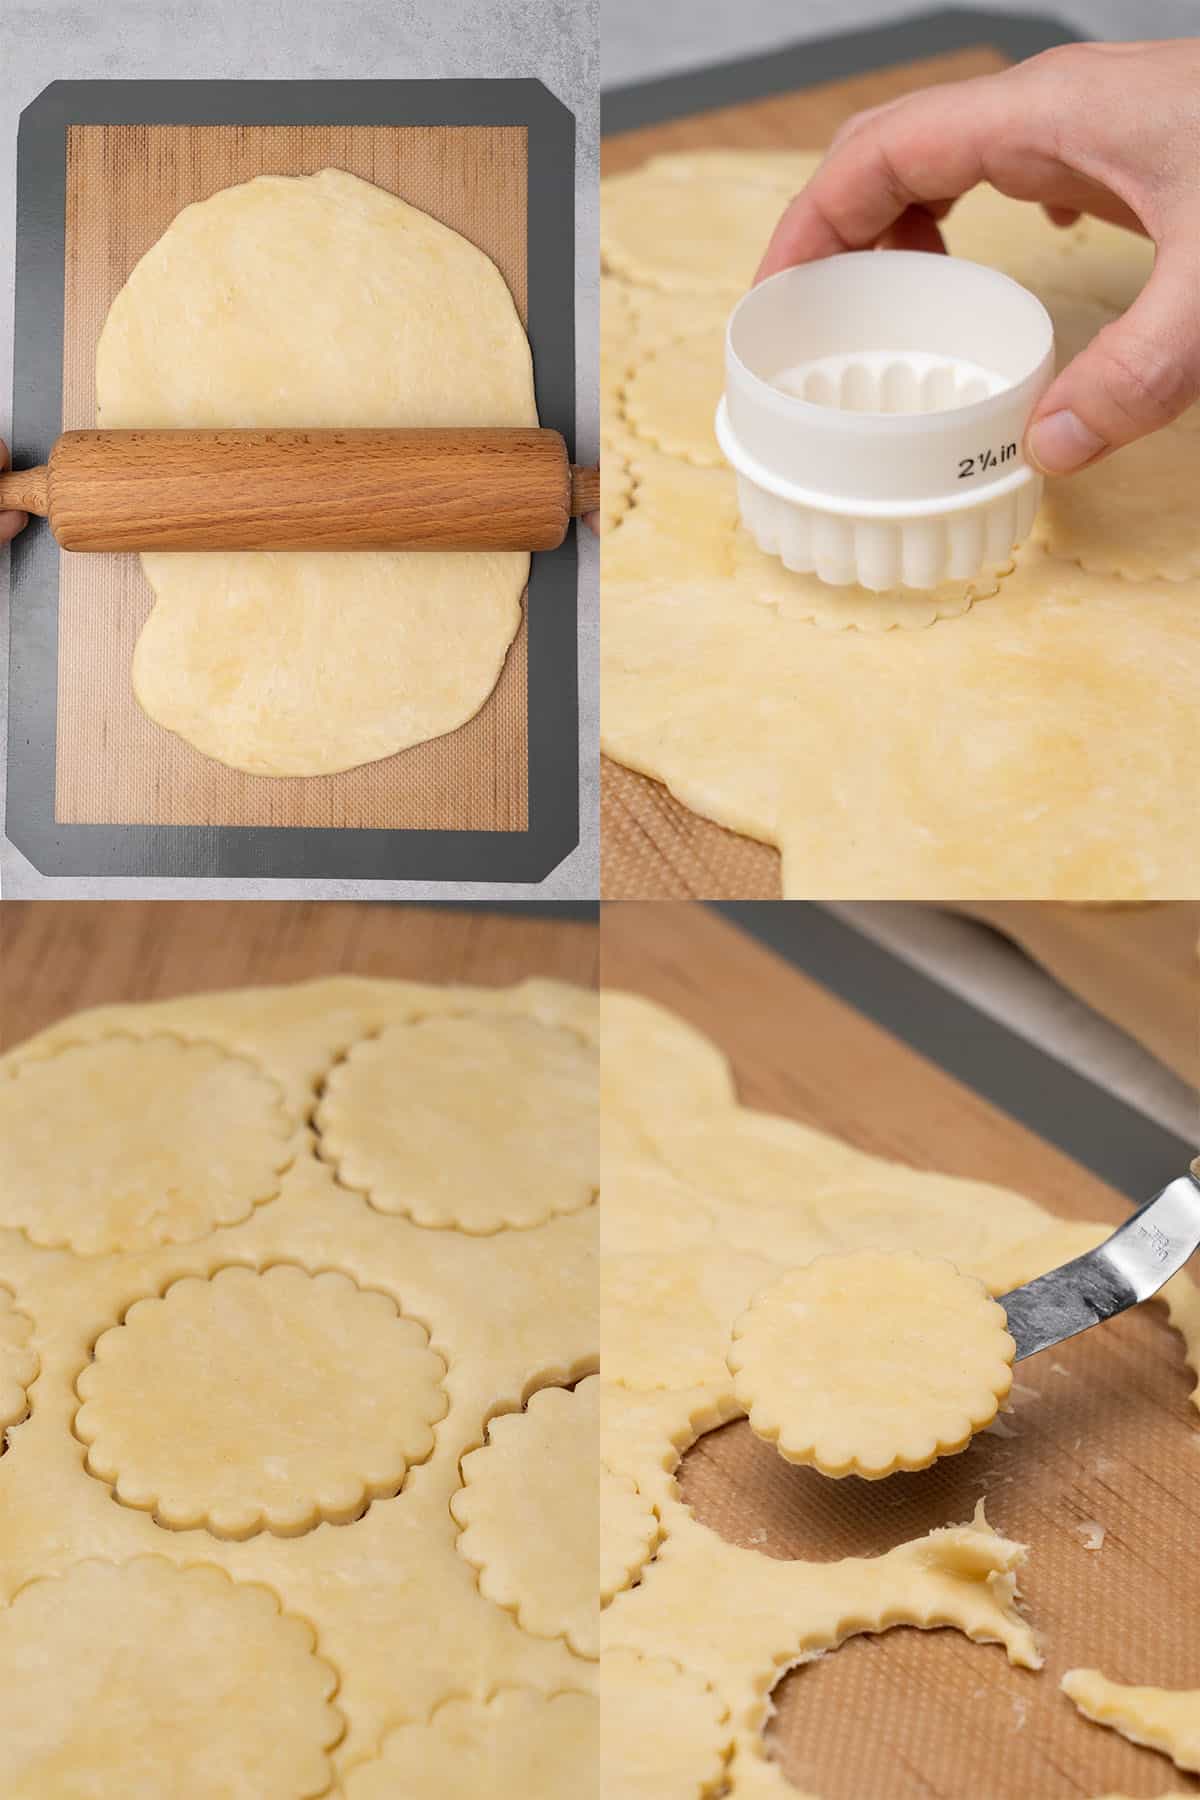 Dough shaping and cutting process for pie crust cookies.